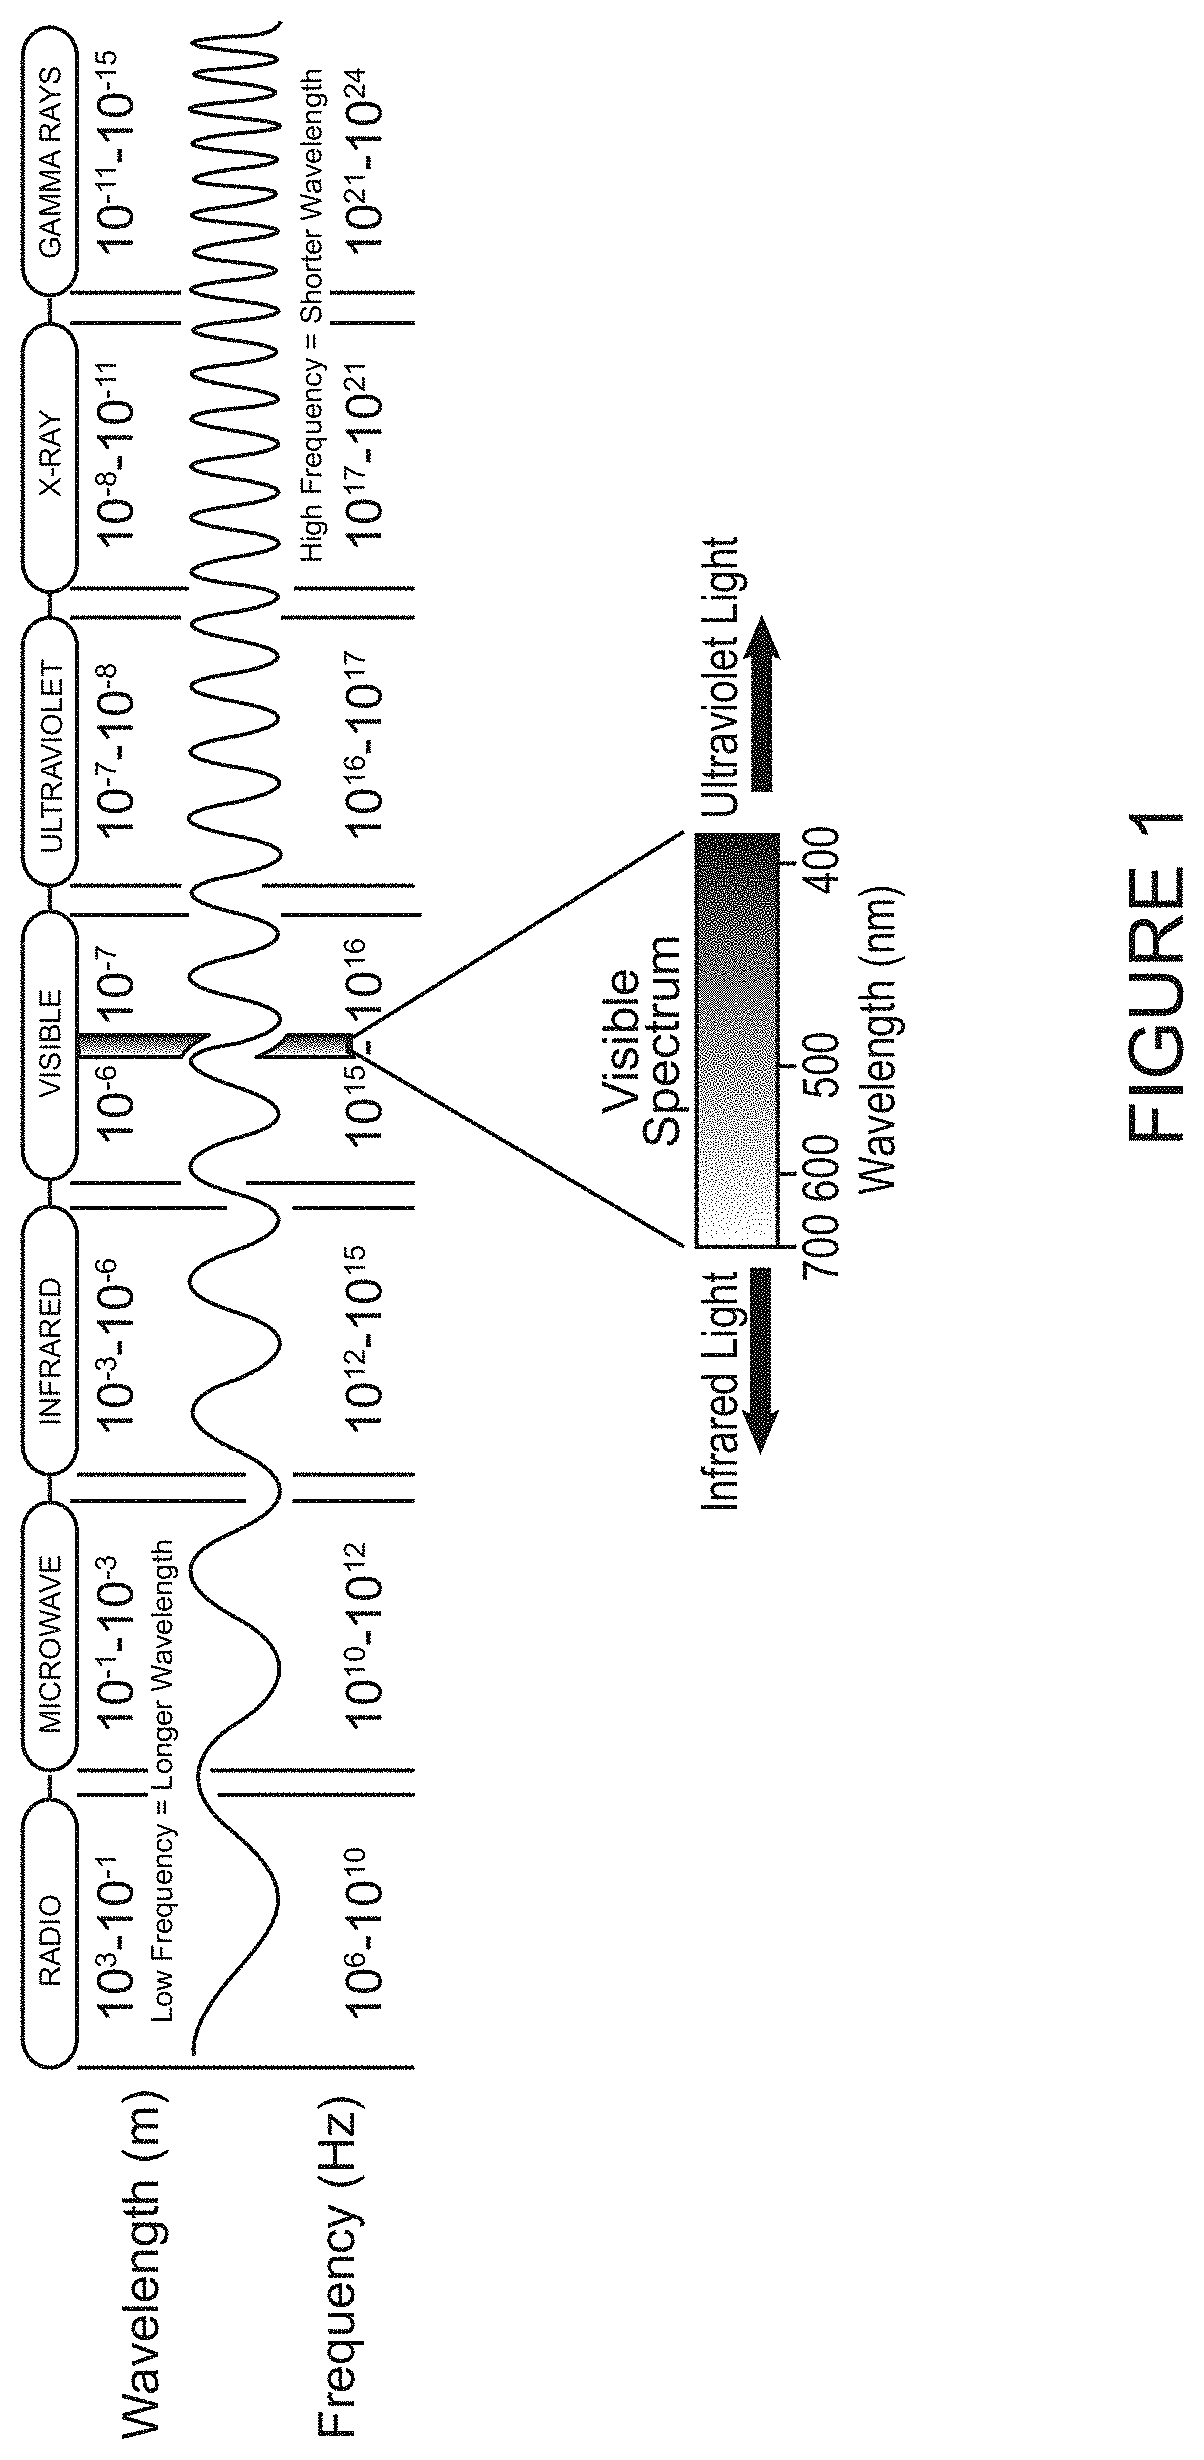 Acquisition of Interferometric Recordings of Brain and Neuron Activity by Coherent Microwave Probe with Therapeutic Activation, Inactivation, or Ablation of Molecular, Neuronal or Brain Targets